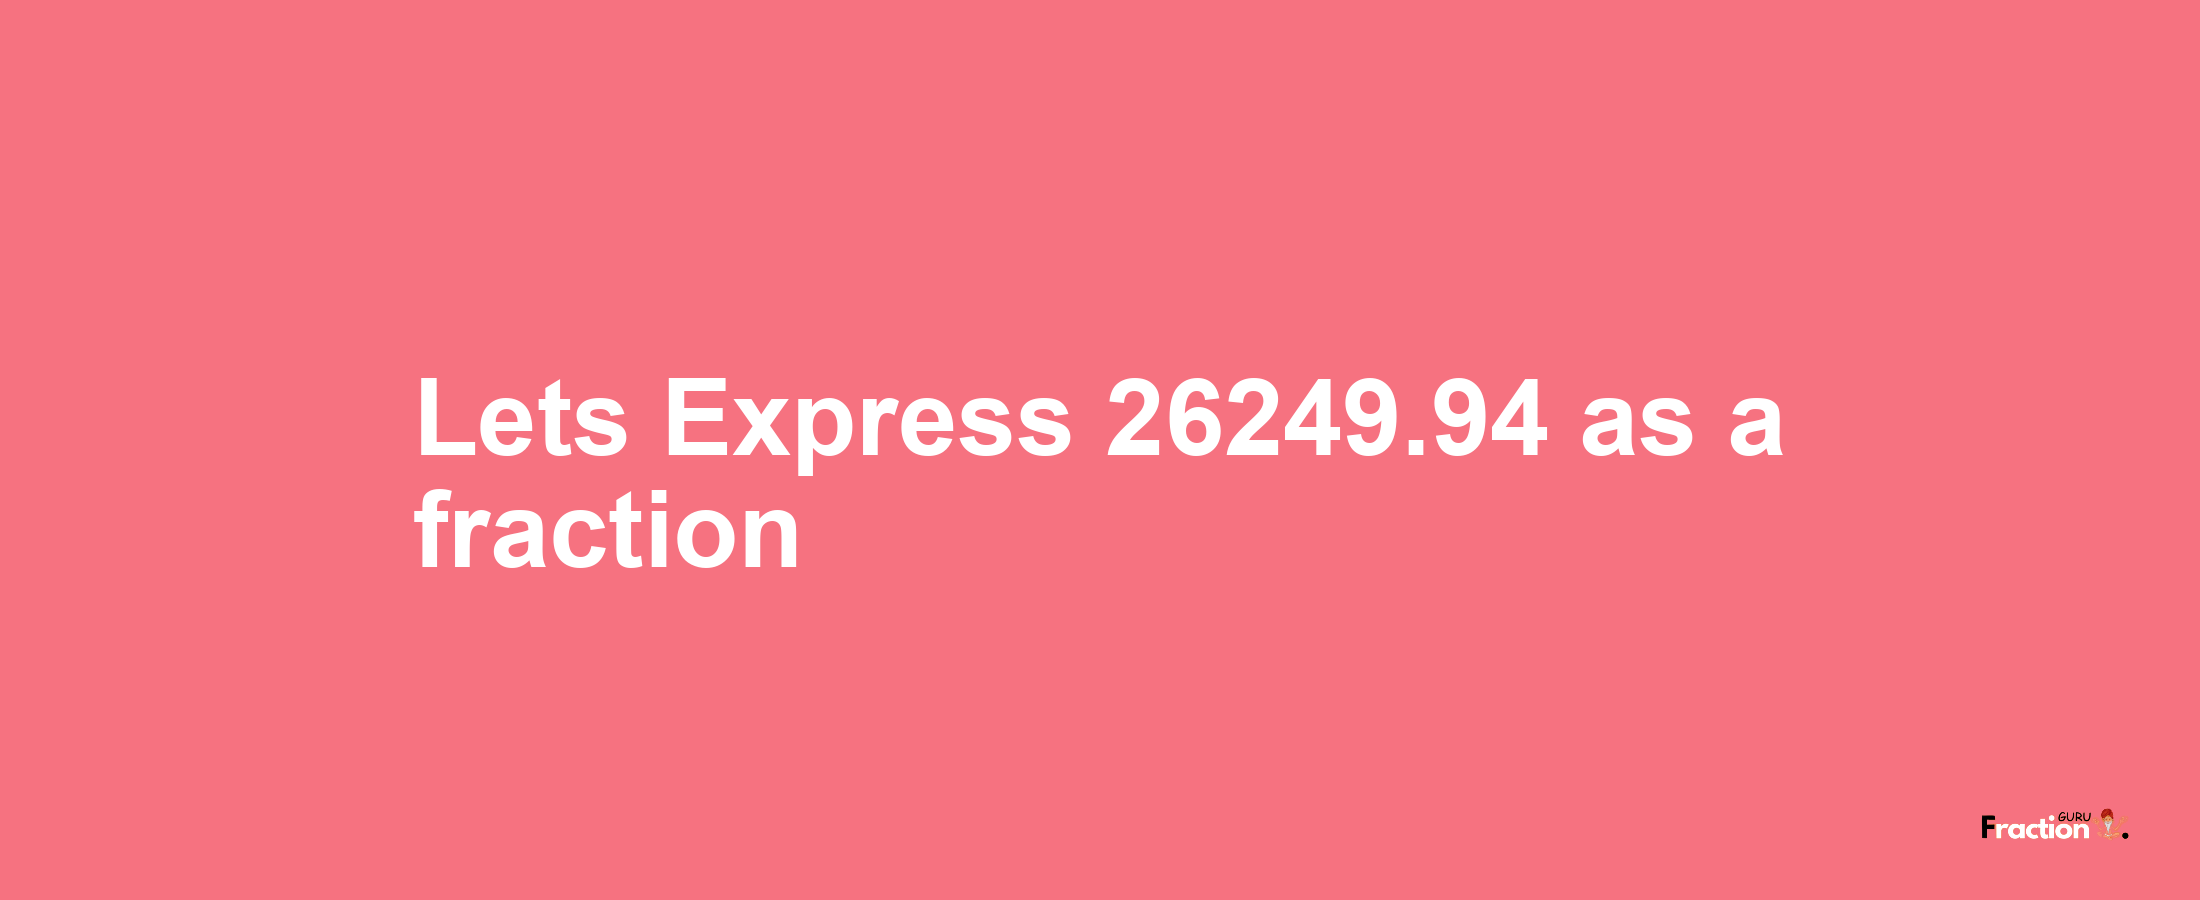 Lets Express 26249.94 as afraction